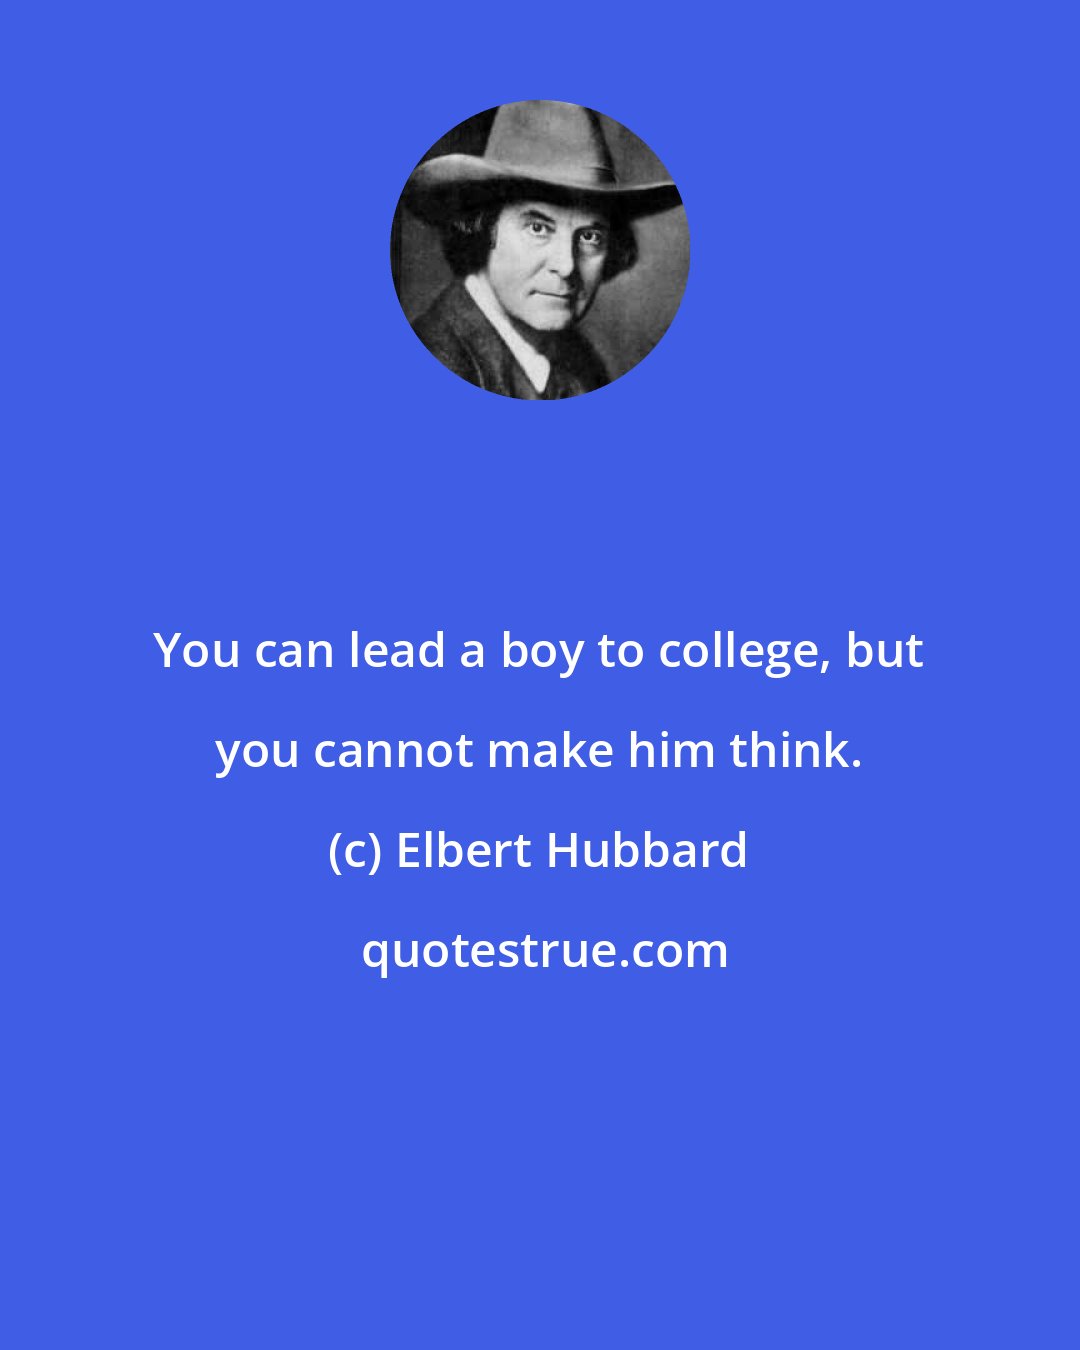 Elbert Hubbard: You can lead a boy to college, but you cannot make him think.